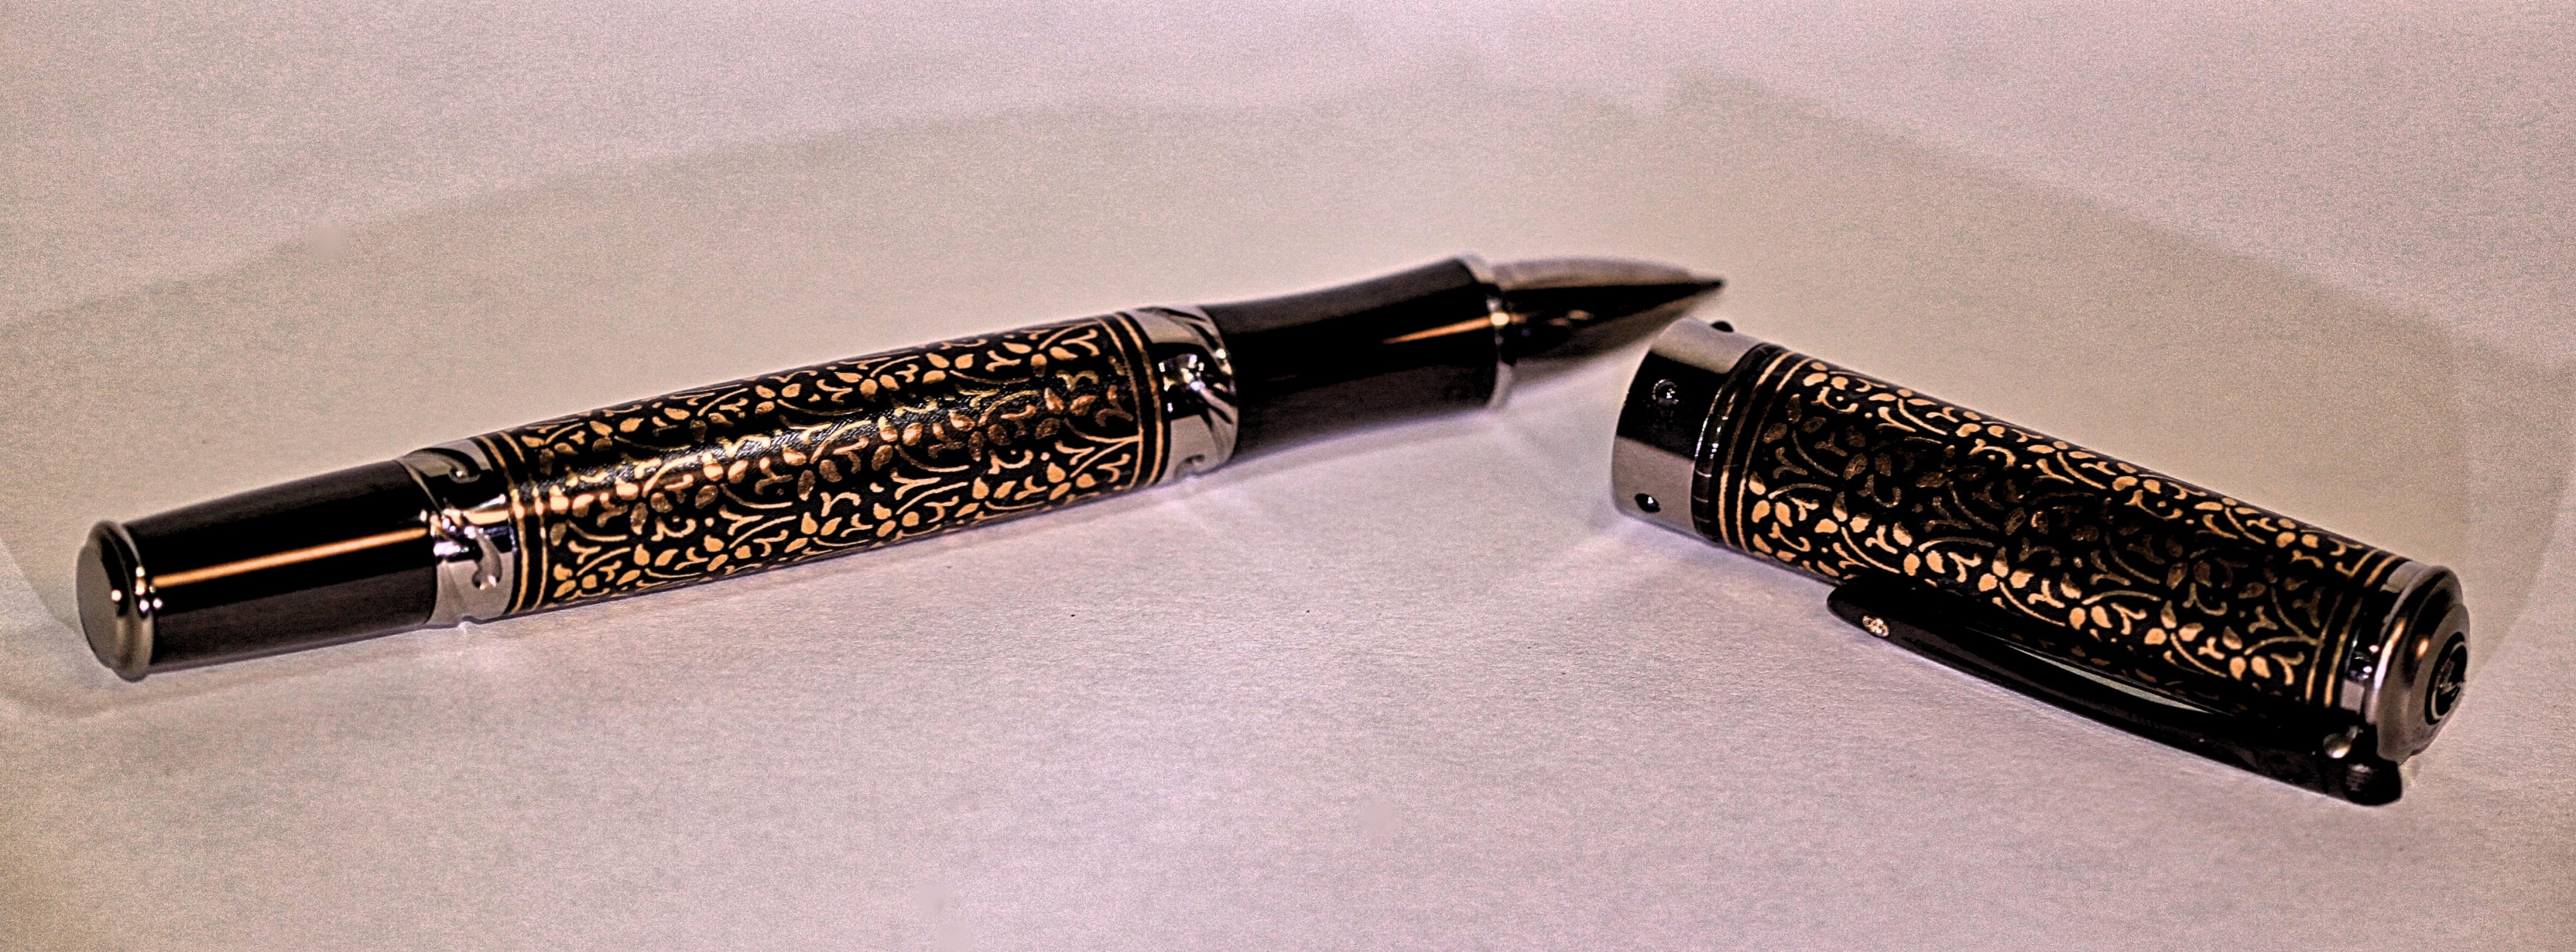 The Cabernet Ivy rollerball pen features 24K koftgari, titanium and carbon fiber.  Koftgari is an ancient Indian technique of designing an amazing and unique piece.  The beautiful pen has William Henry's patent-pending Wavelock cap and it is one of